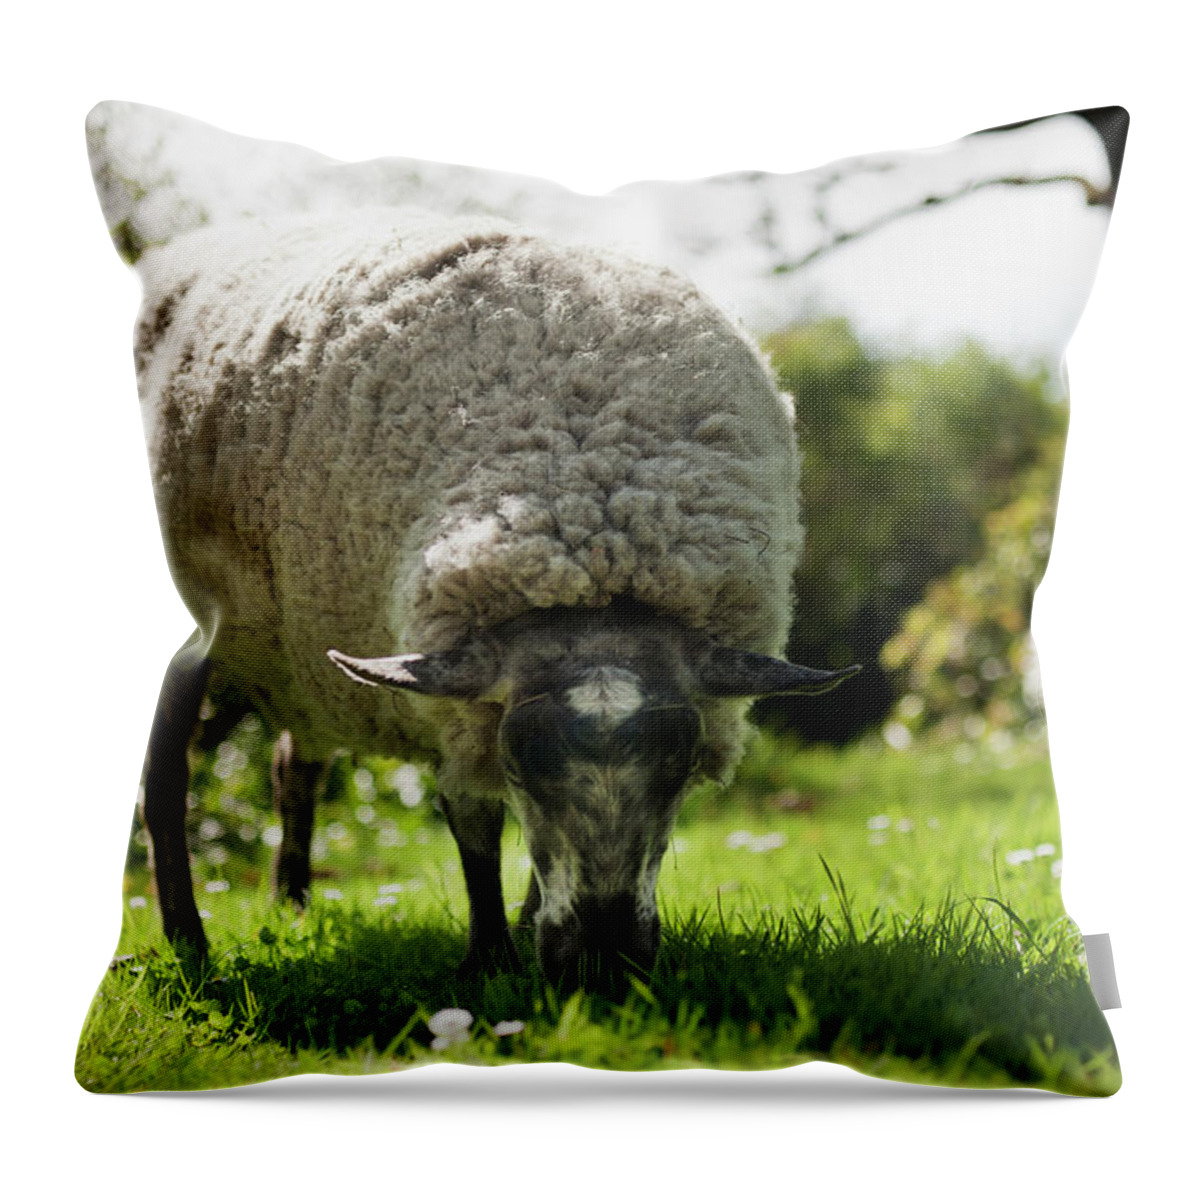 Vancouver Island Throw Pillow featuring the photograph A Sheep Grazes On The Grass by Helene Cyr / Design Pics